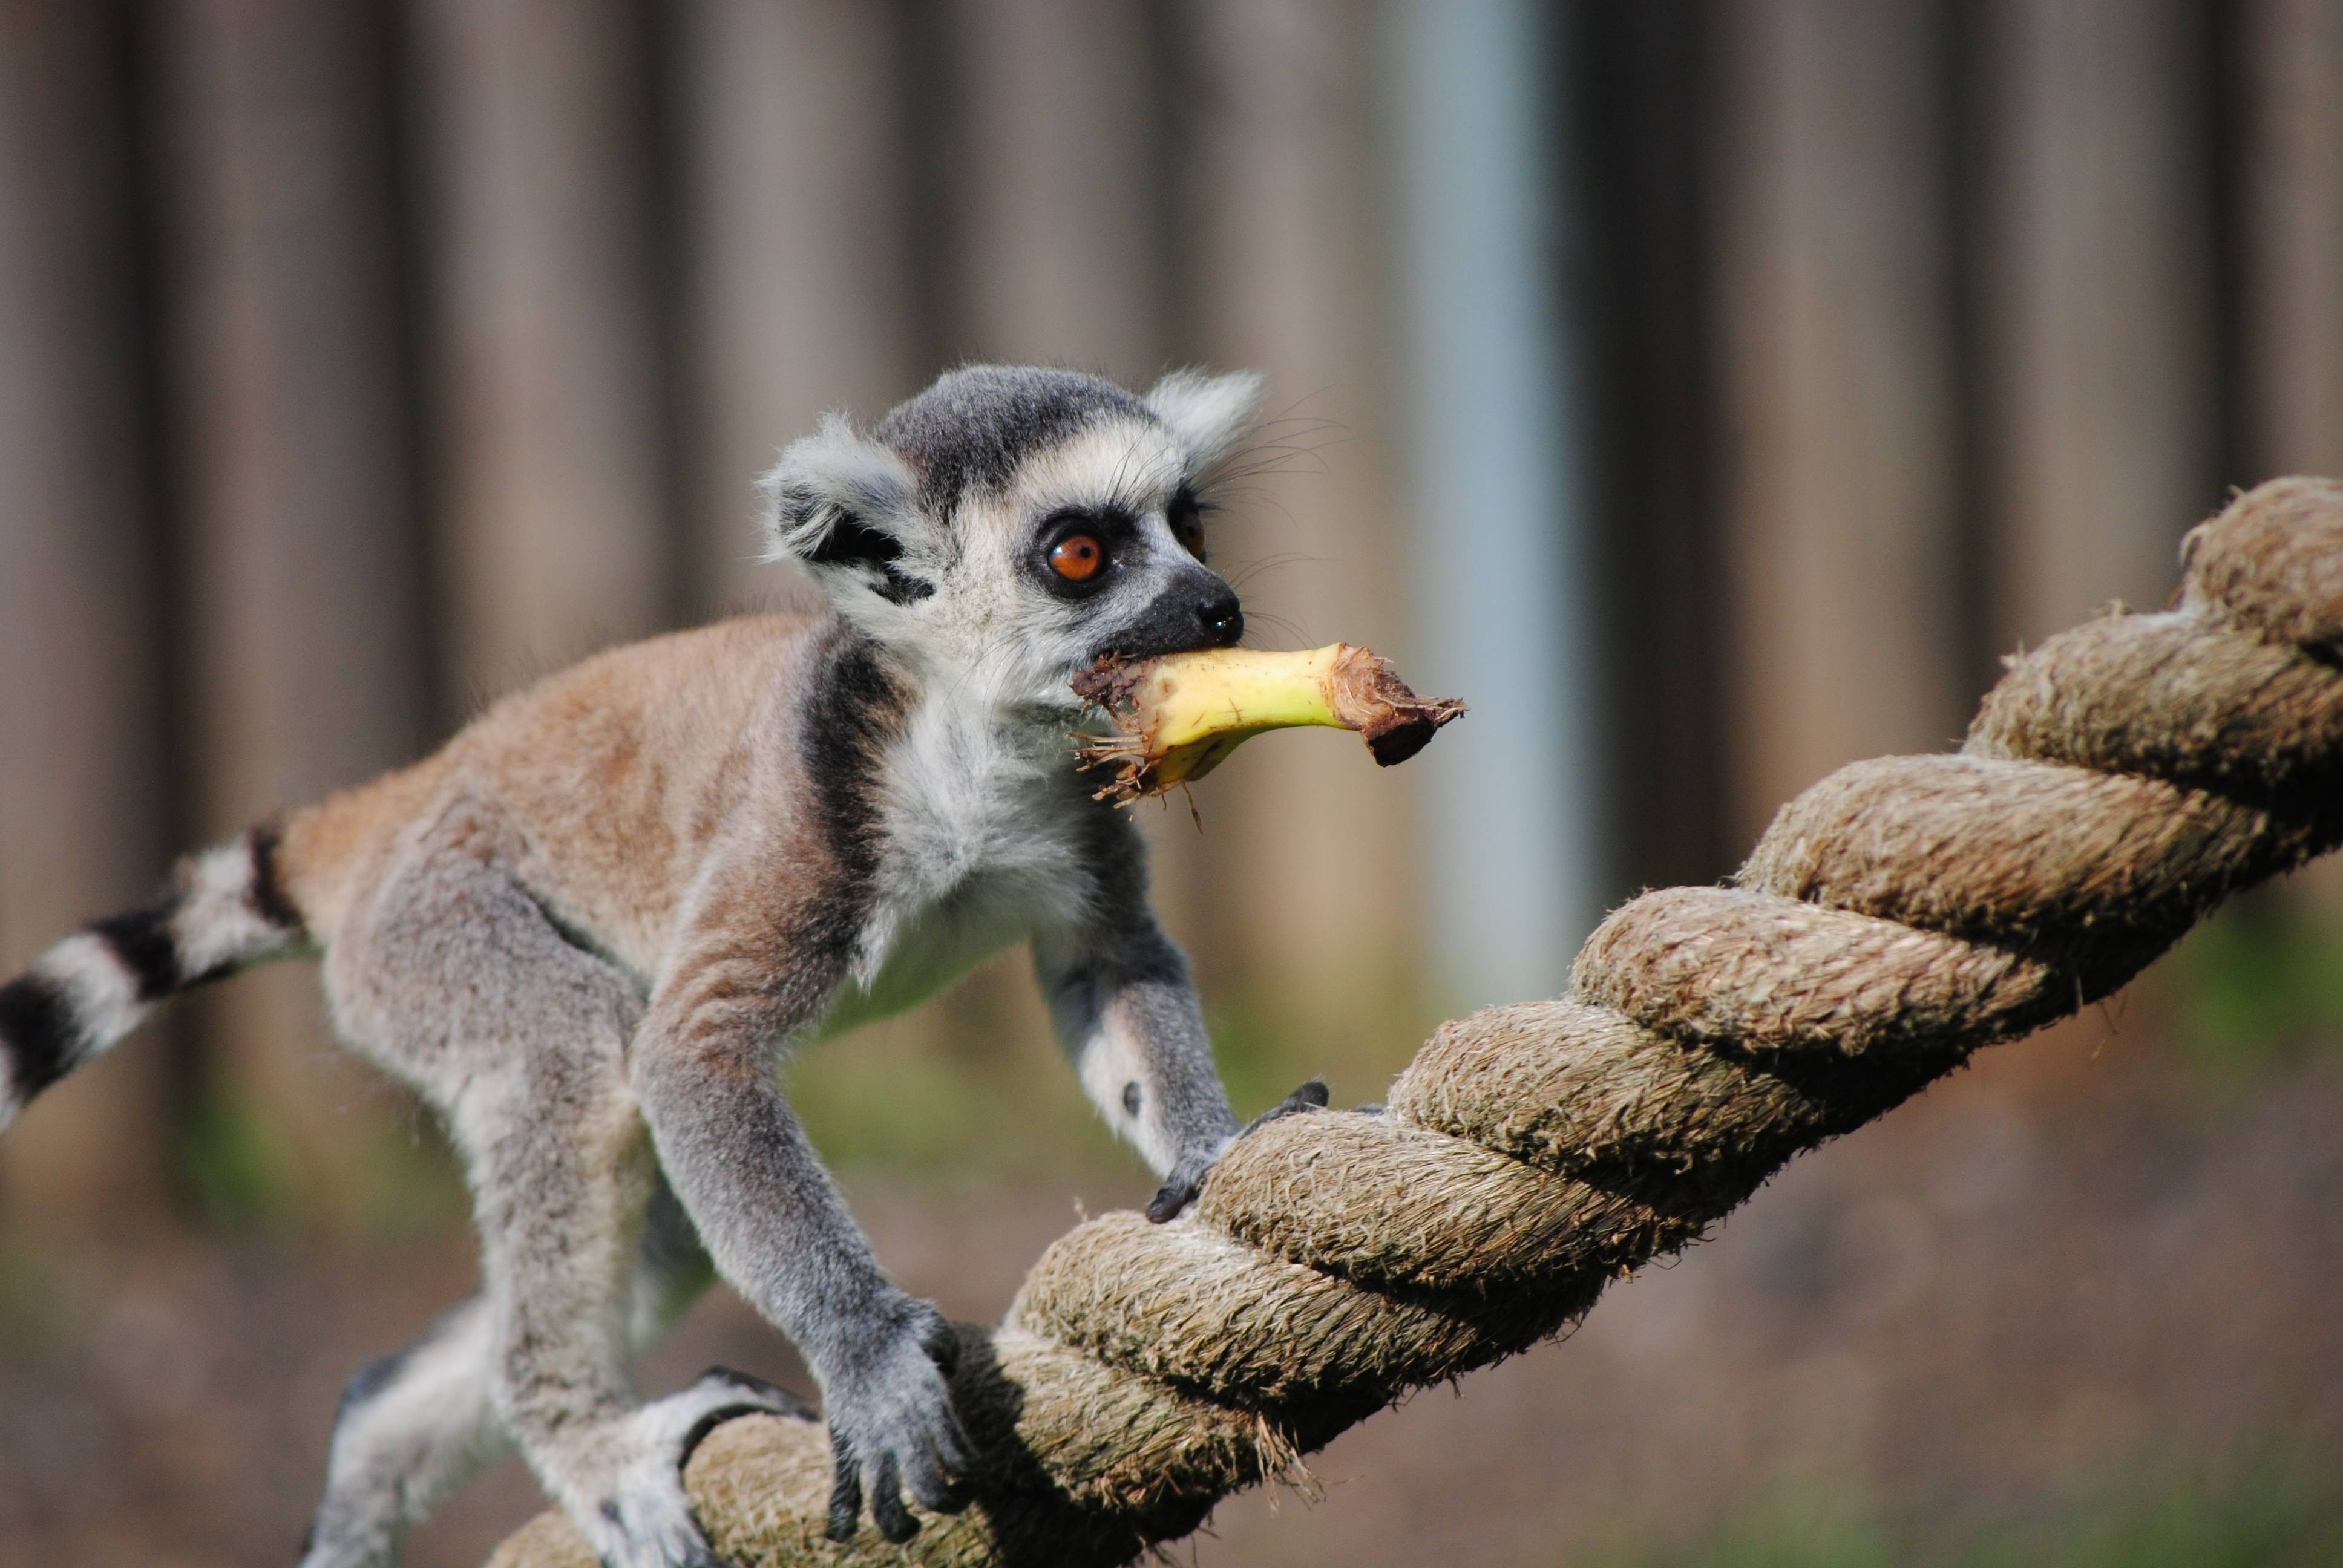 animals, food, cable, stroll, animal, lemur, rope Image for desktop